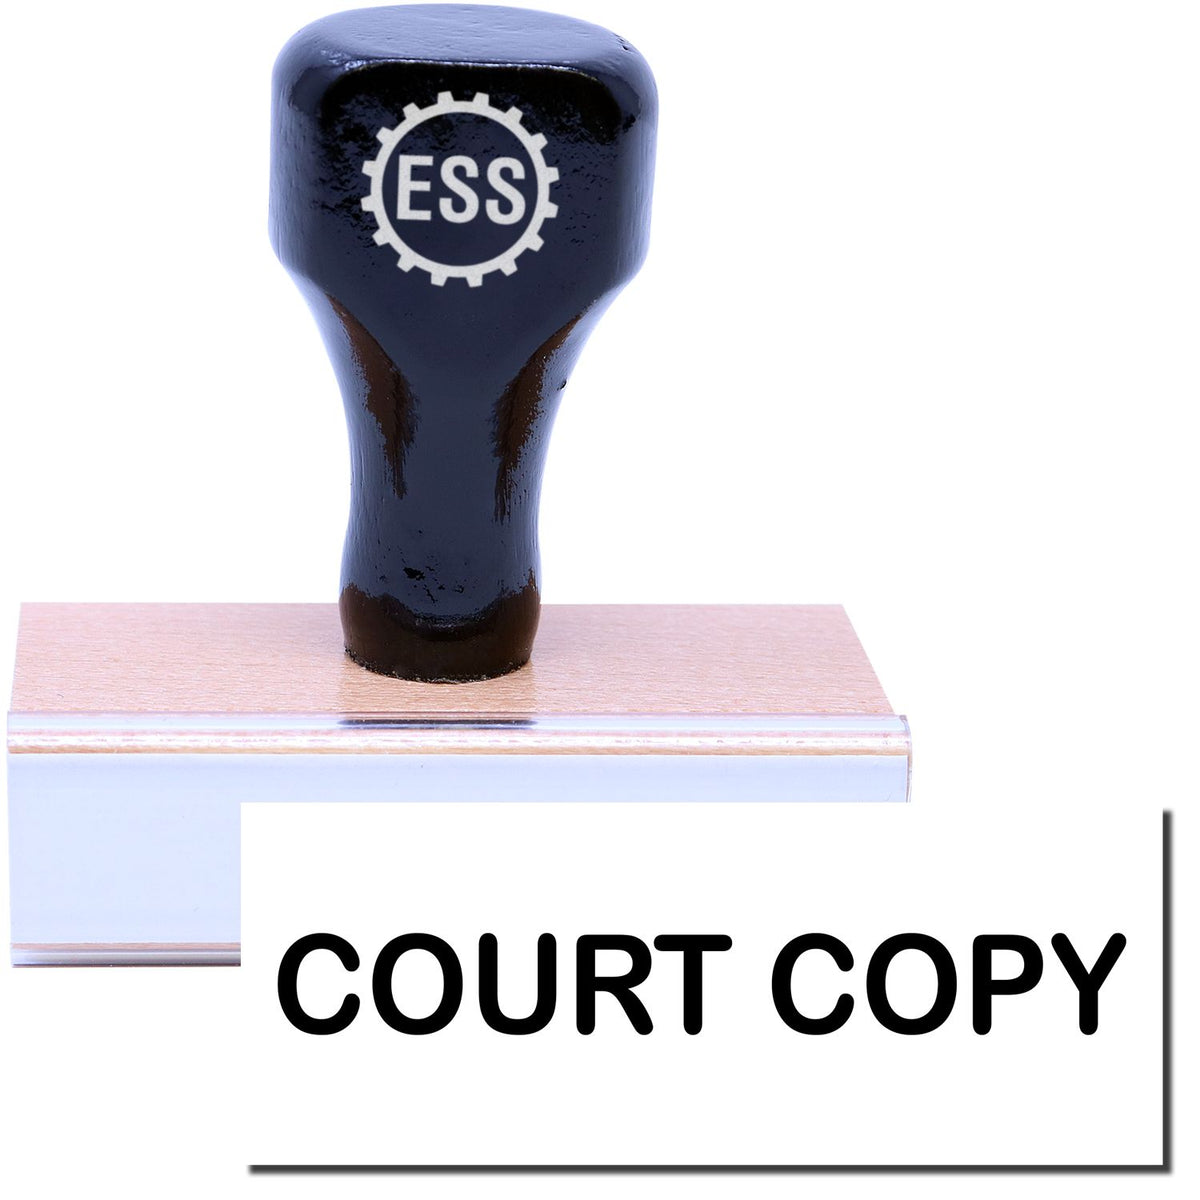 A stock office rubber stamp with a stamped image showing how the text &quot;COURT COPY&quot; in a large font is displayed after stamping.